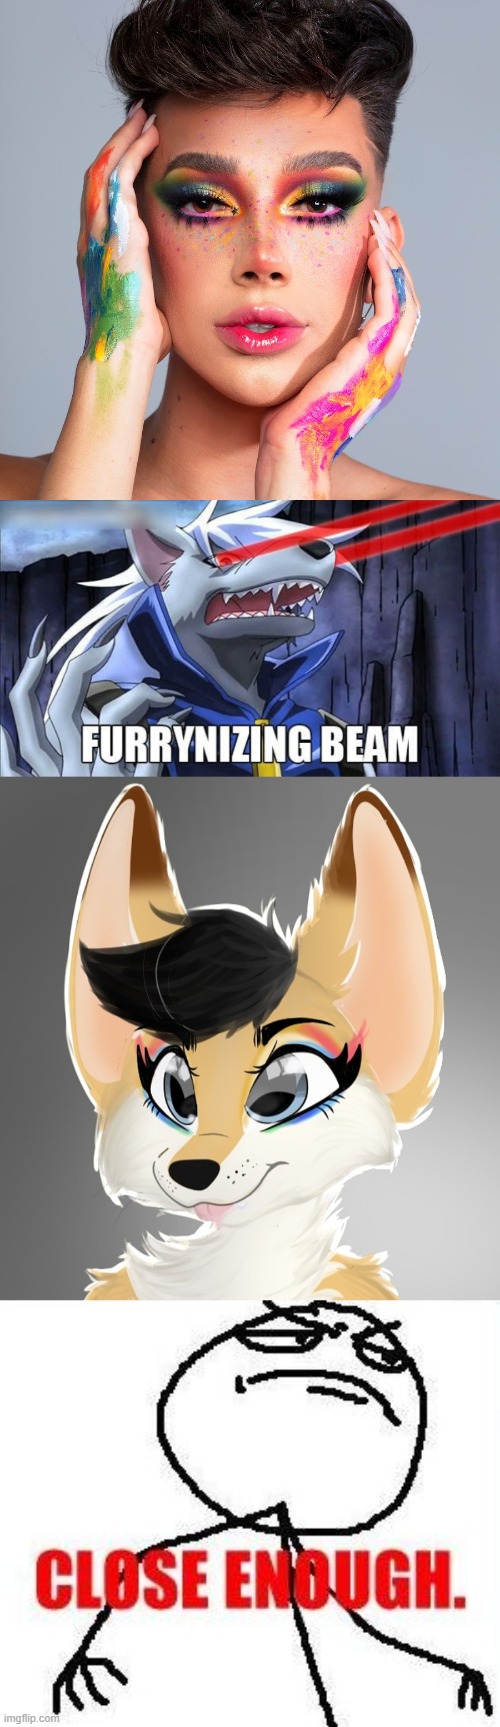 I mean, Hey, It's pretty accurate (By kibblesdraws) | image tagged in furrynizing beam,memes,close enough,james charles | made w/ Imgflip meme maker